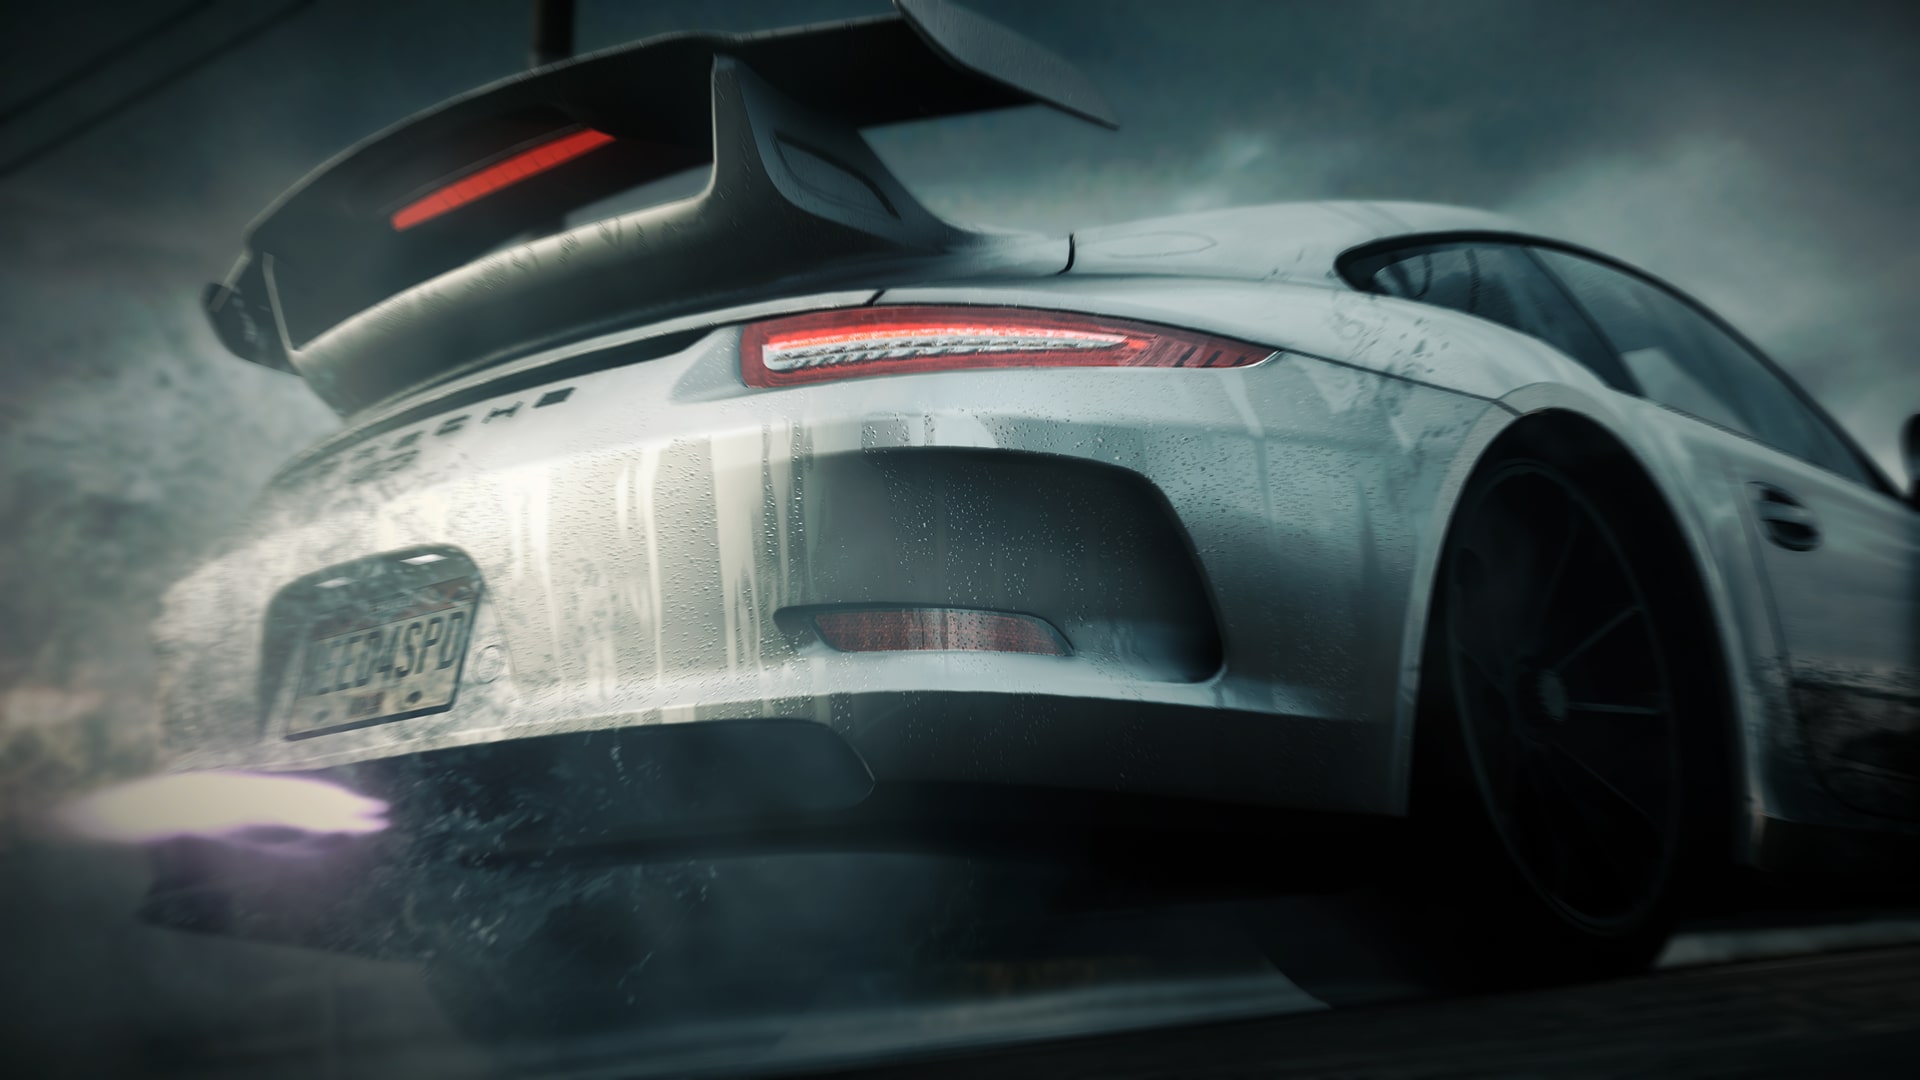 Need for speed rivals ps4 psn midia digital - MSQ Games